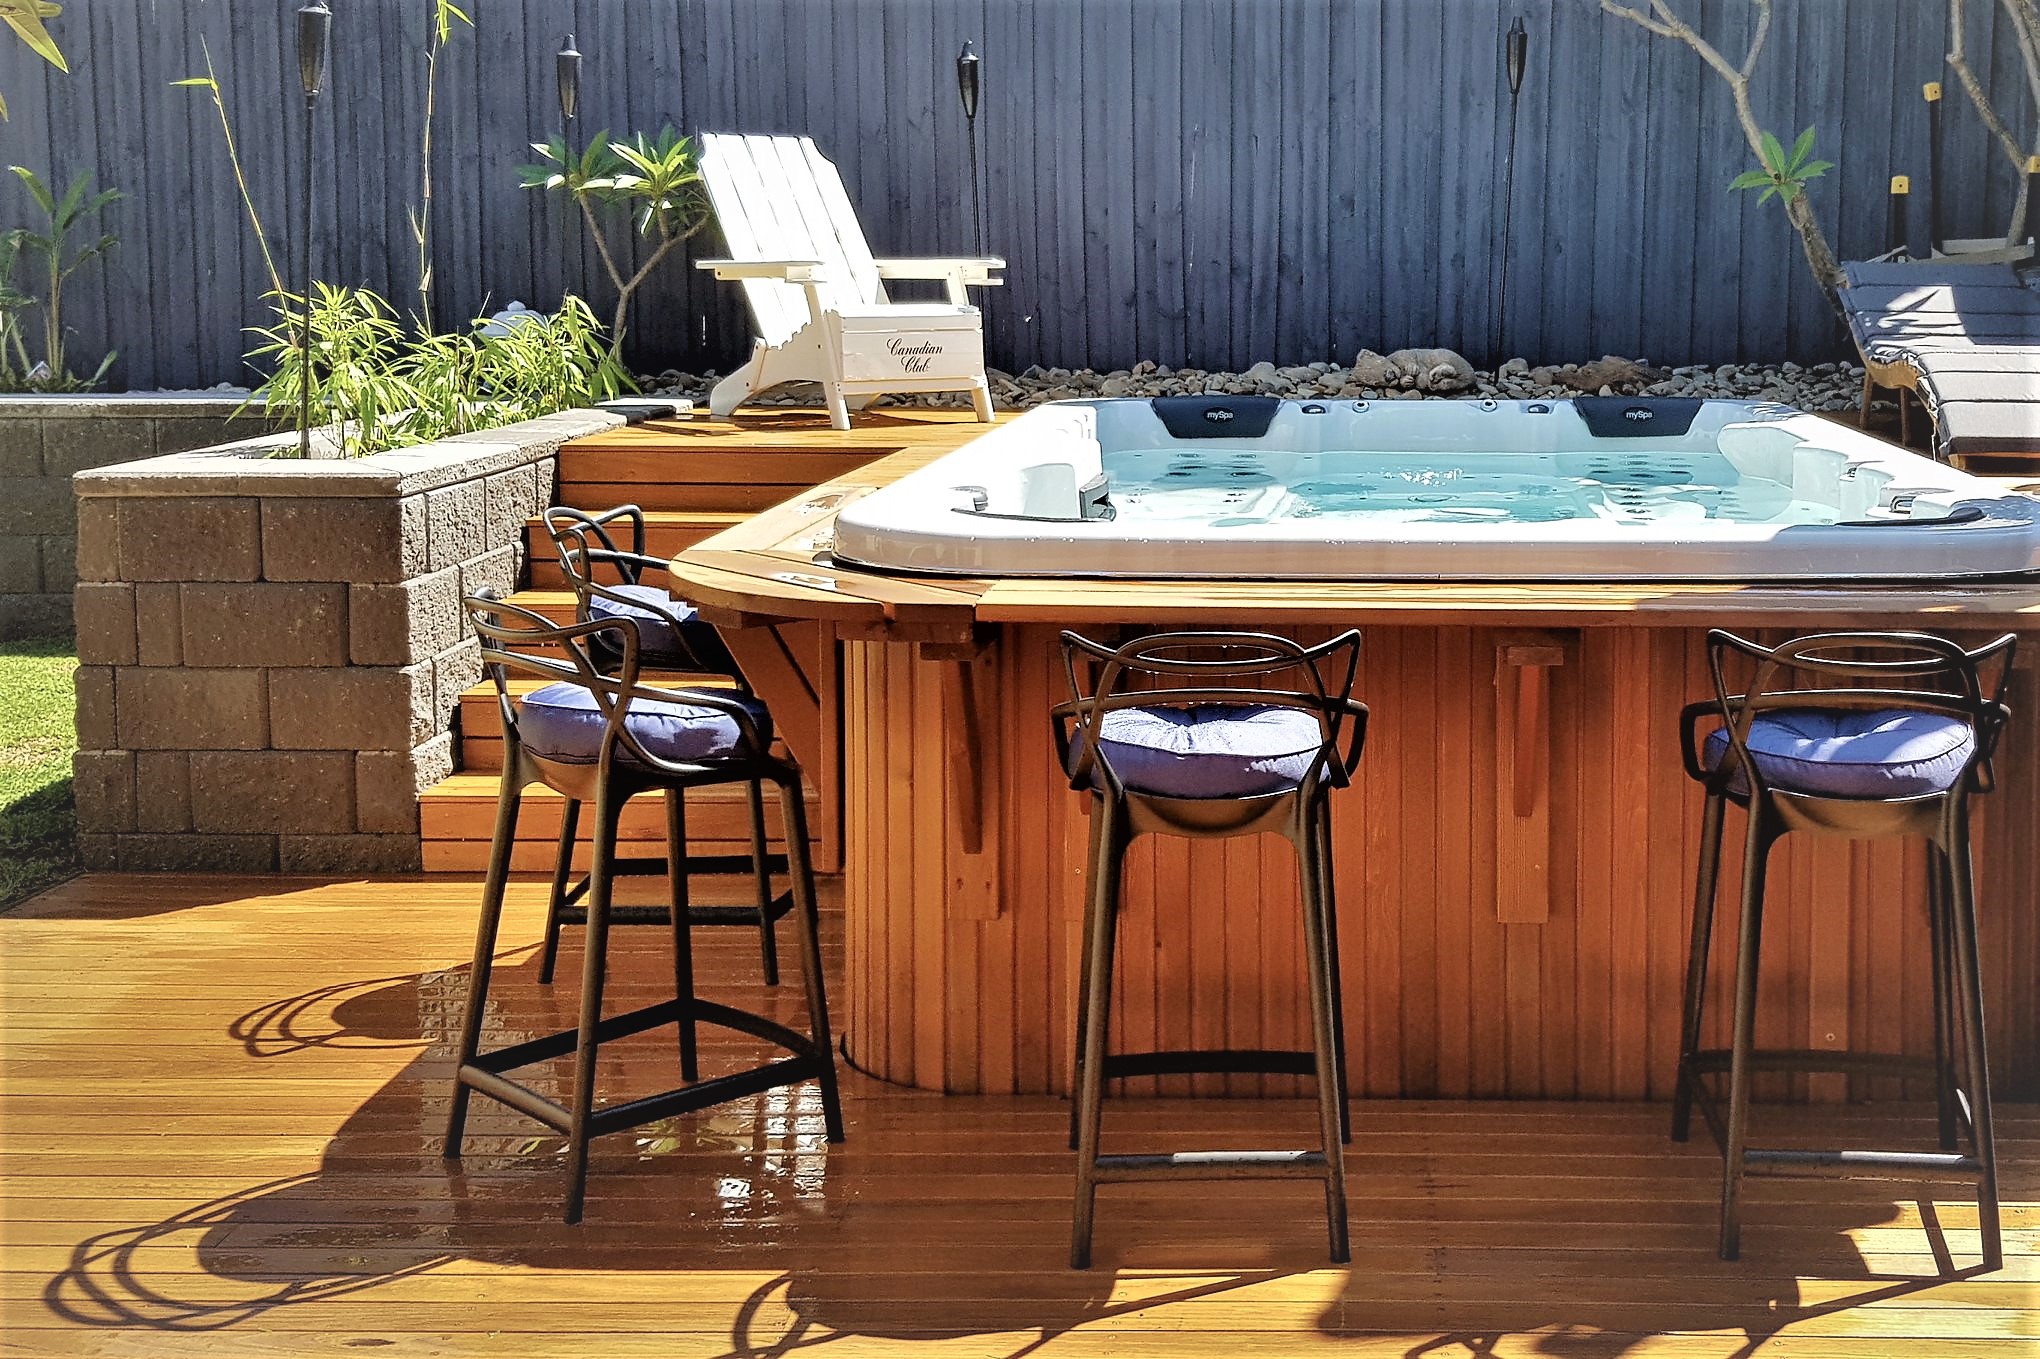 Swim spa landscaping showing a pool surrounded by a wooden bar and bar chairs.